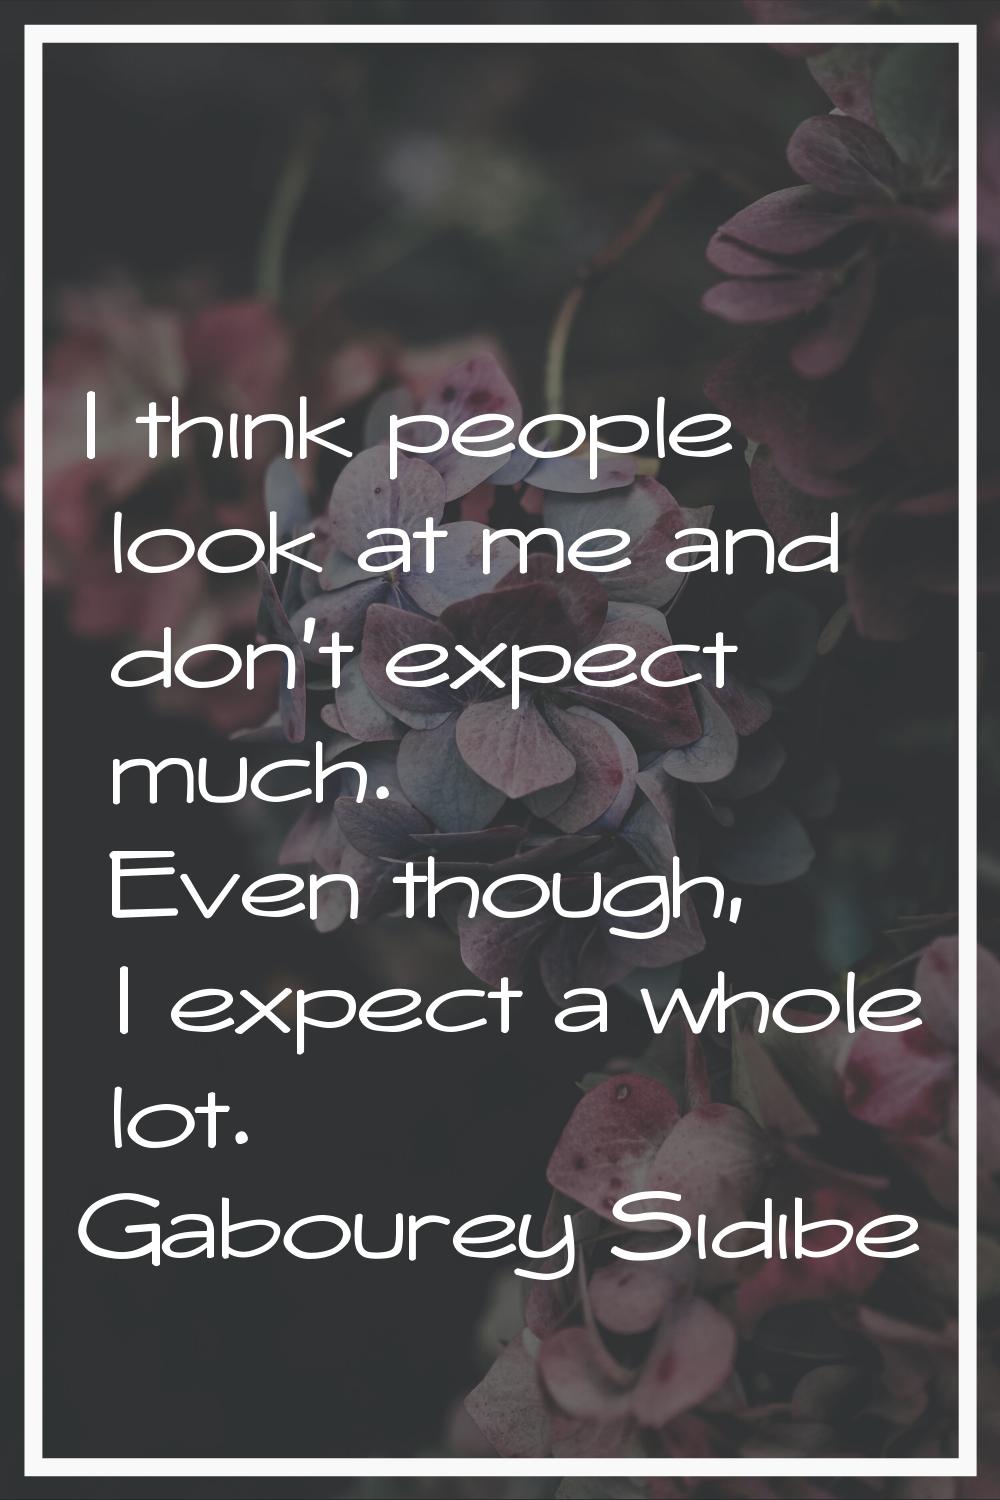 I think people look at me and don't expect much. Even though, I expect a whole lot.